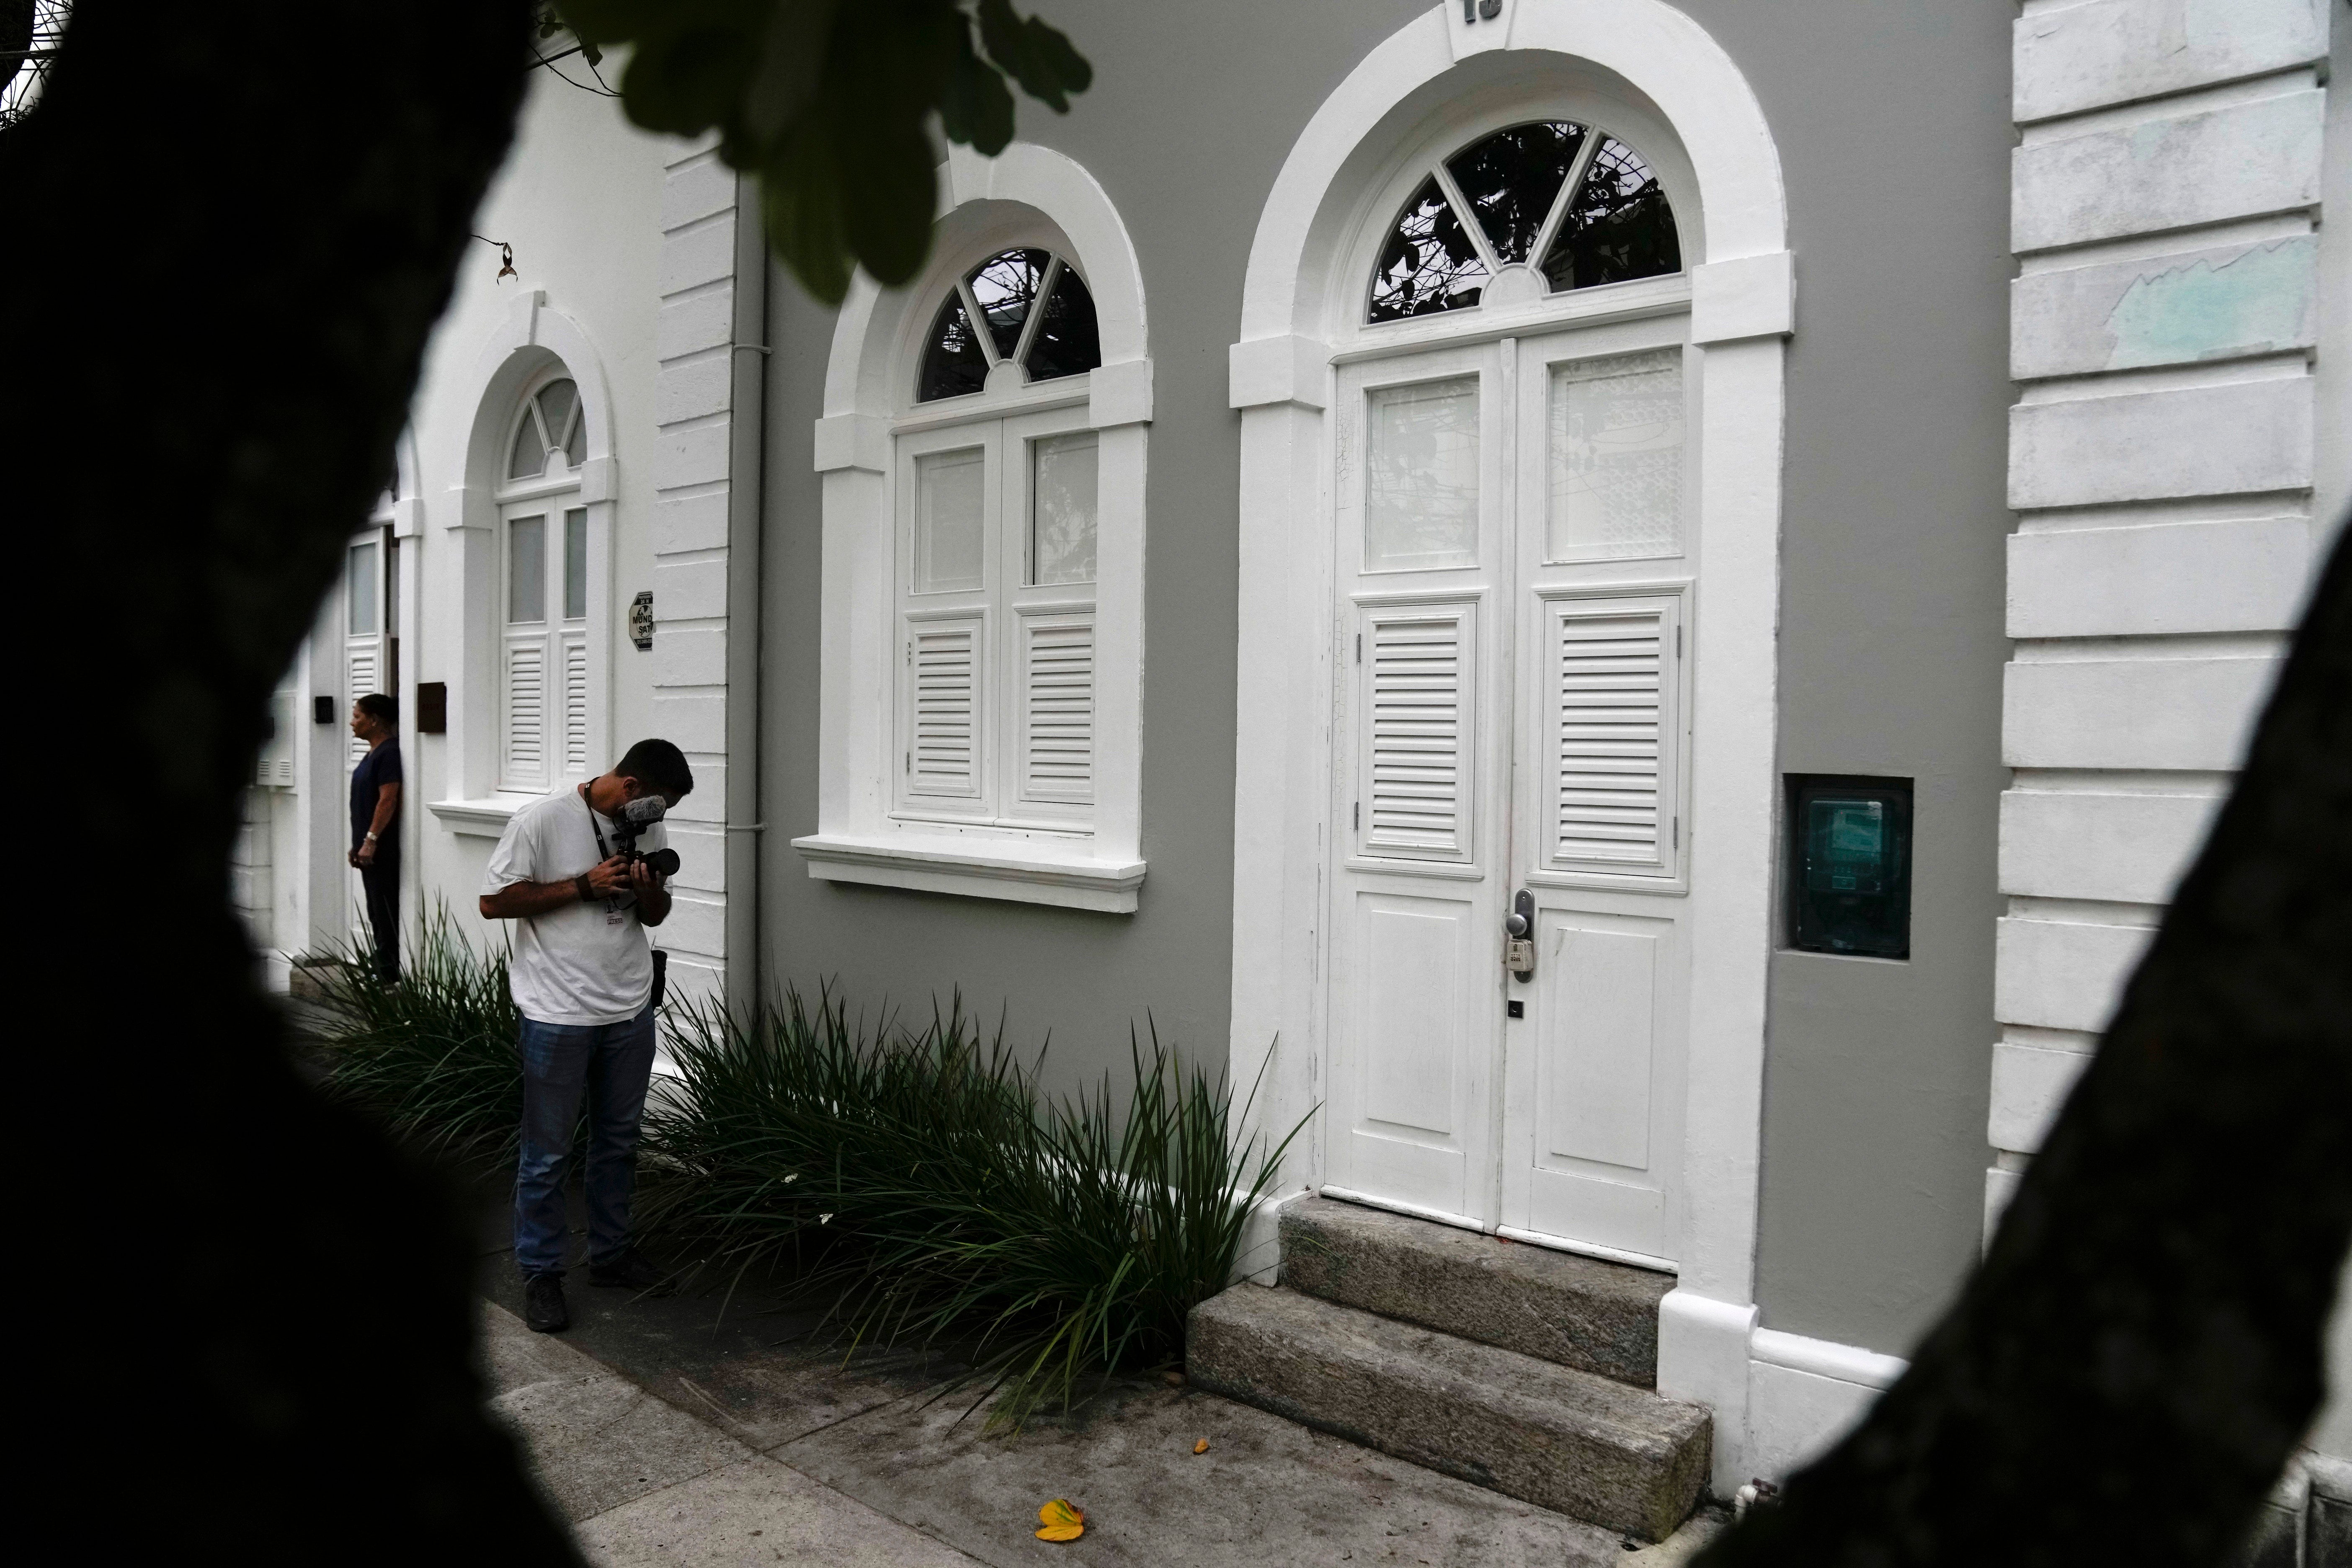 A journalist films the entrance to the apartment where Brent Sikkema, an American art dealer, was found dead, in Rio de Janeiro, Brazil